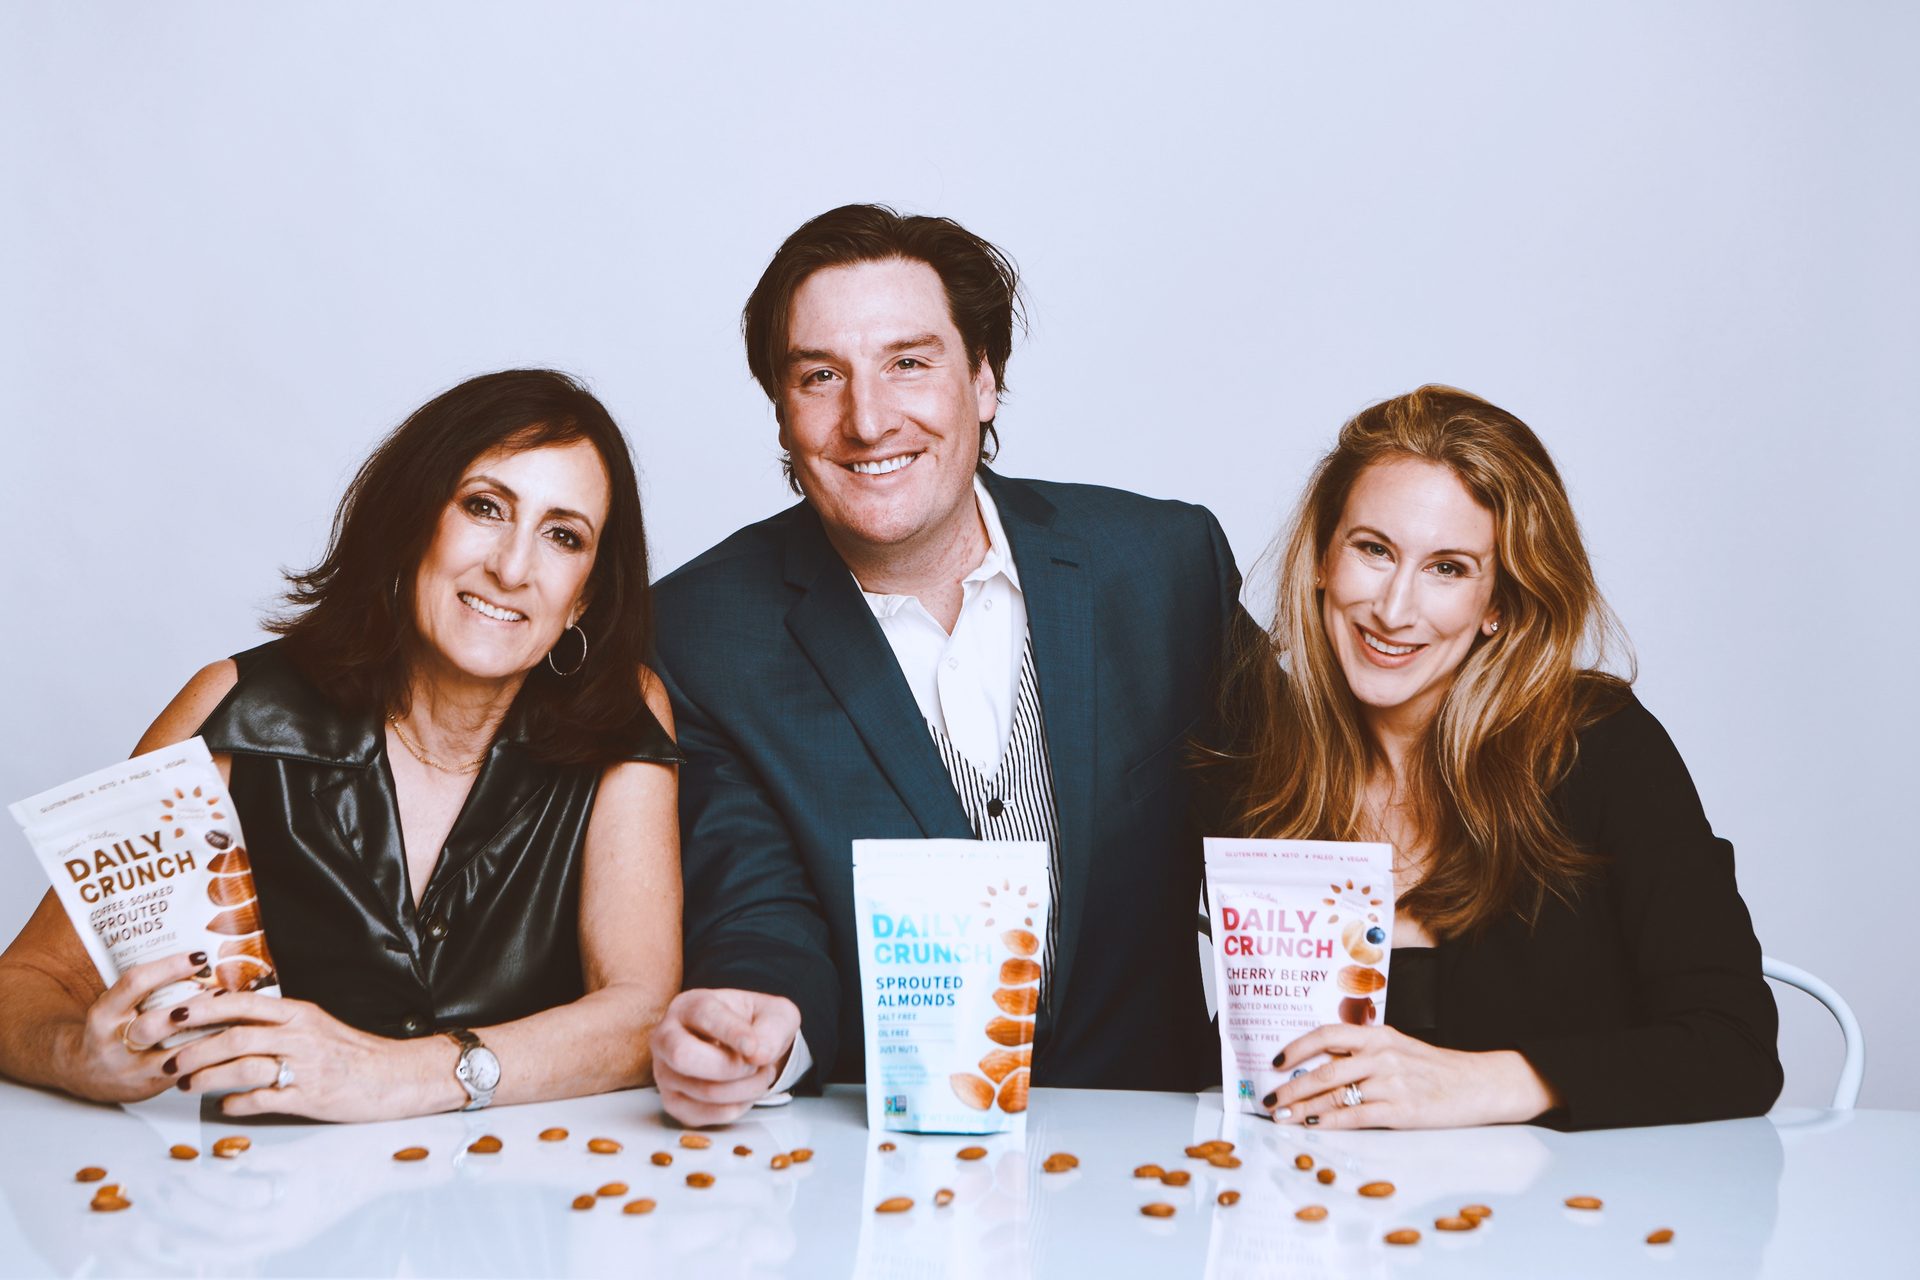 Group photo, Countertop, Products, Almonds, 3 people, Smiling